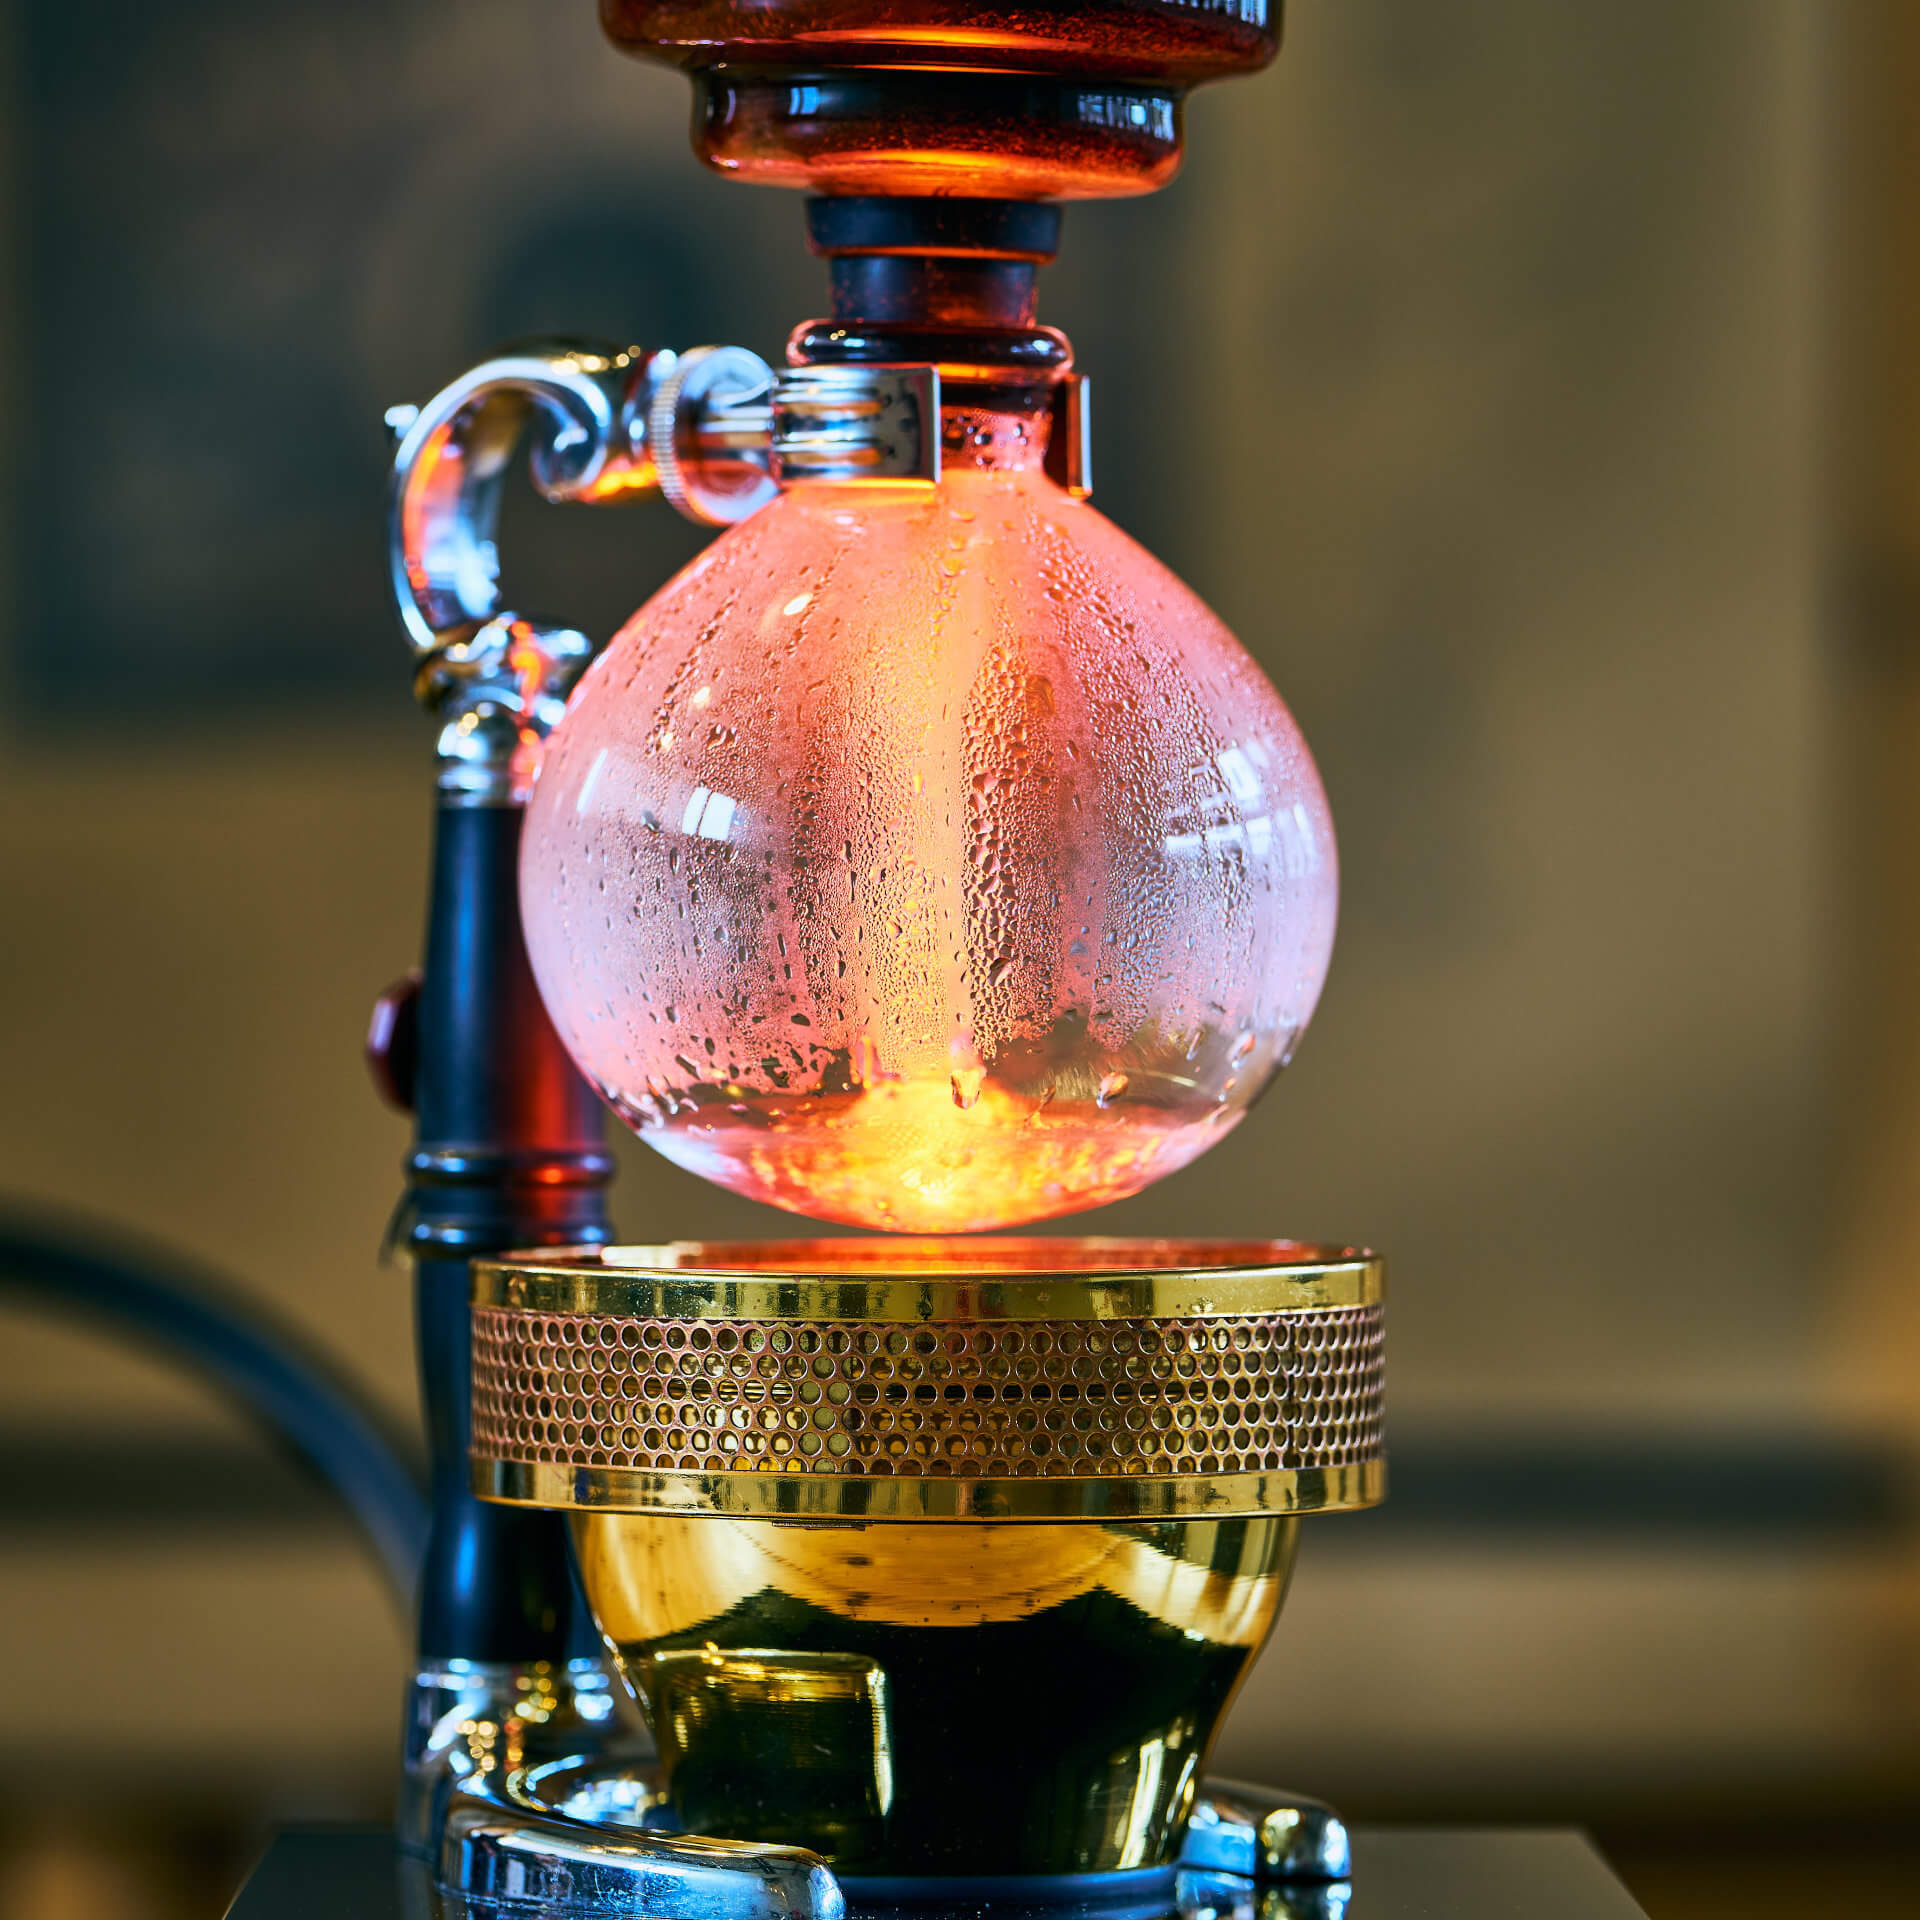 A photo of the siphon method of brewing